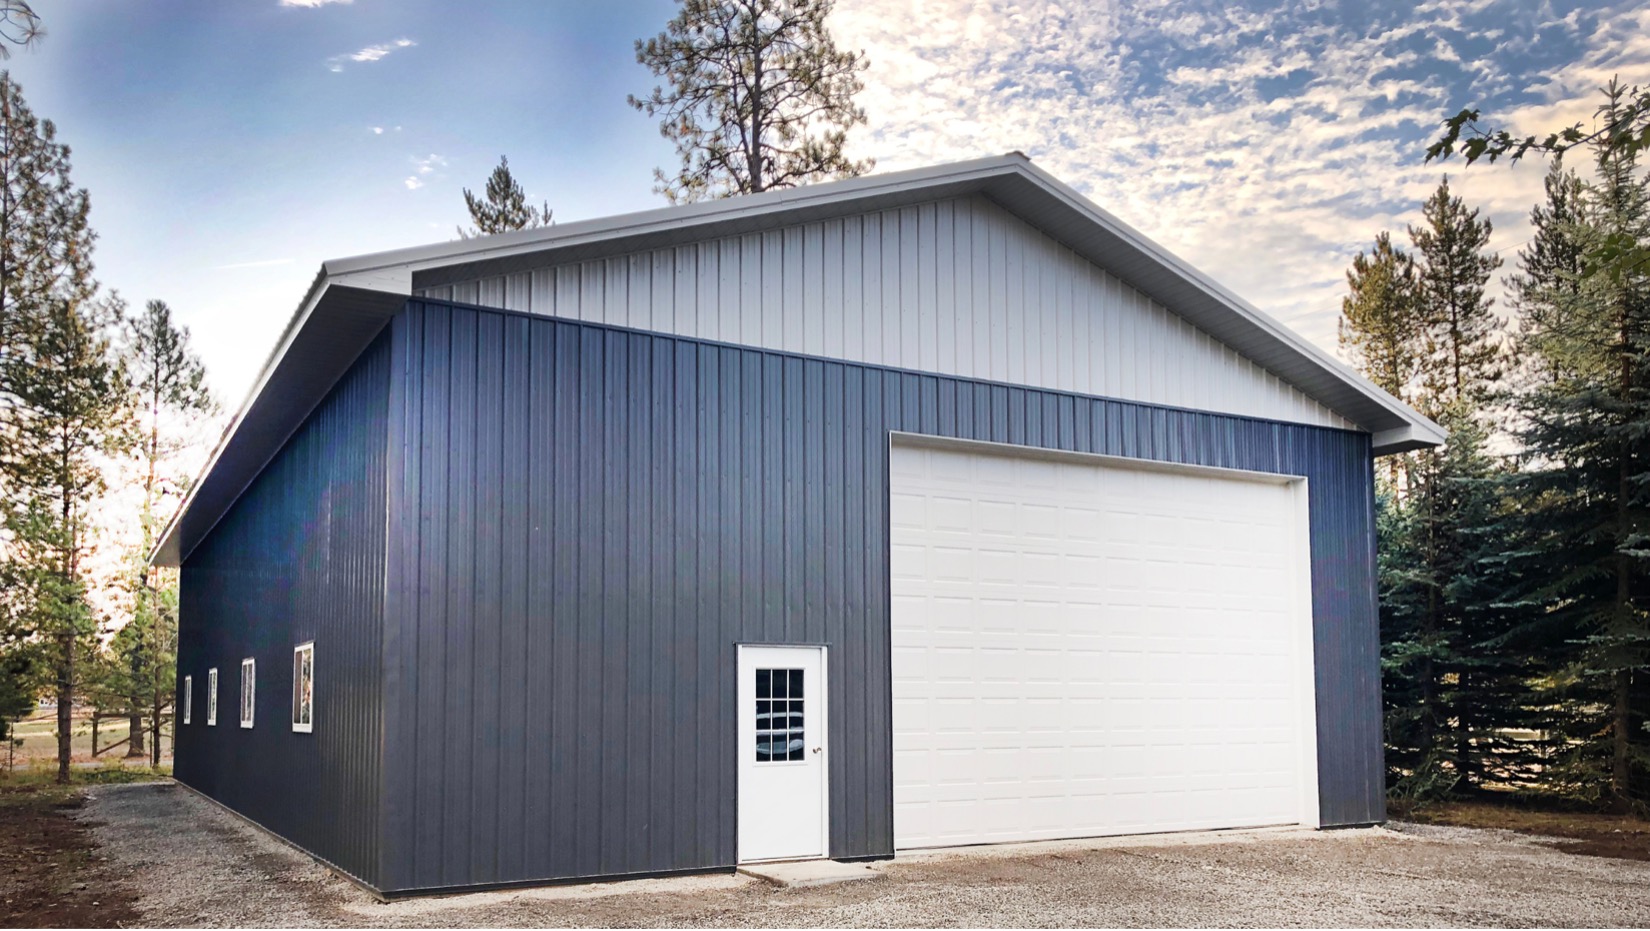 7 Tips for Building the Safest Steel Buildings in Wyoming